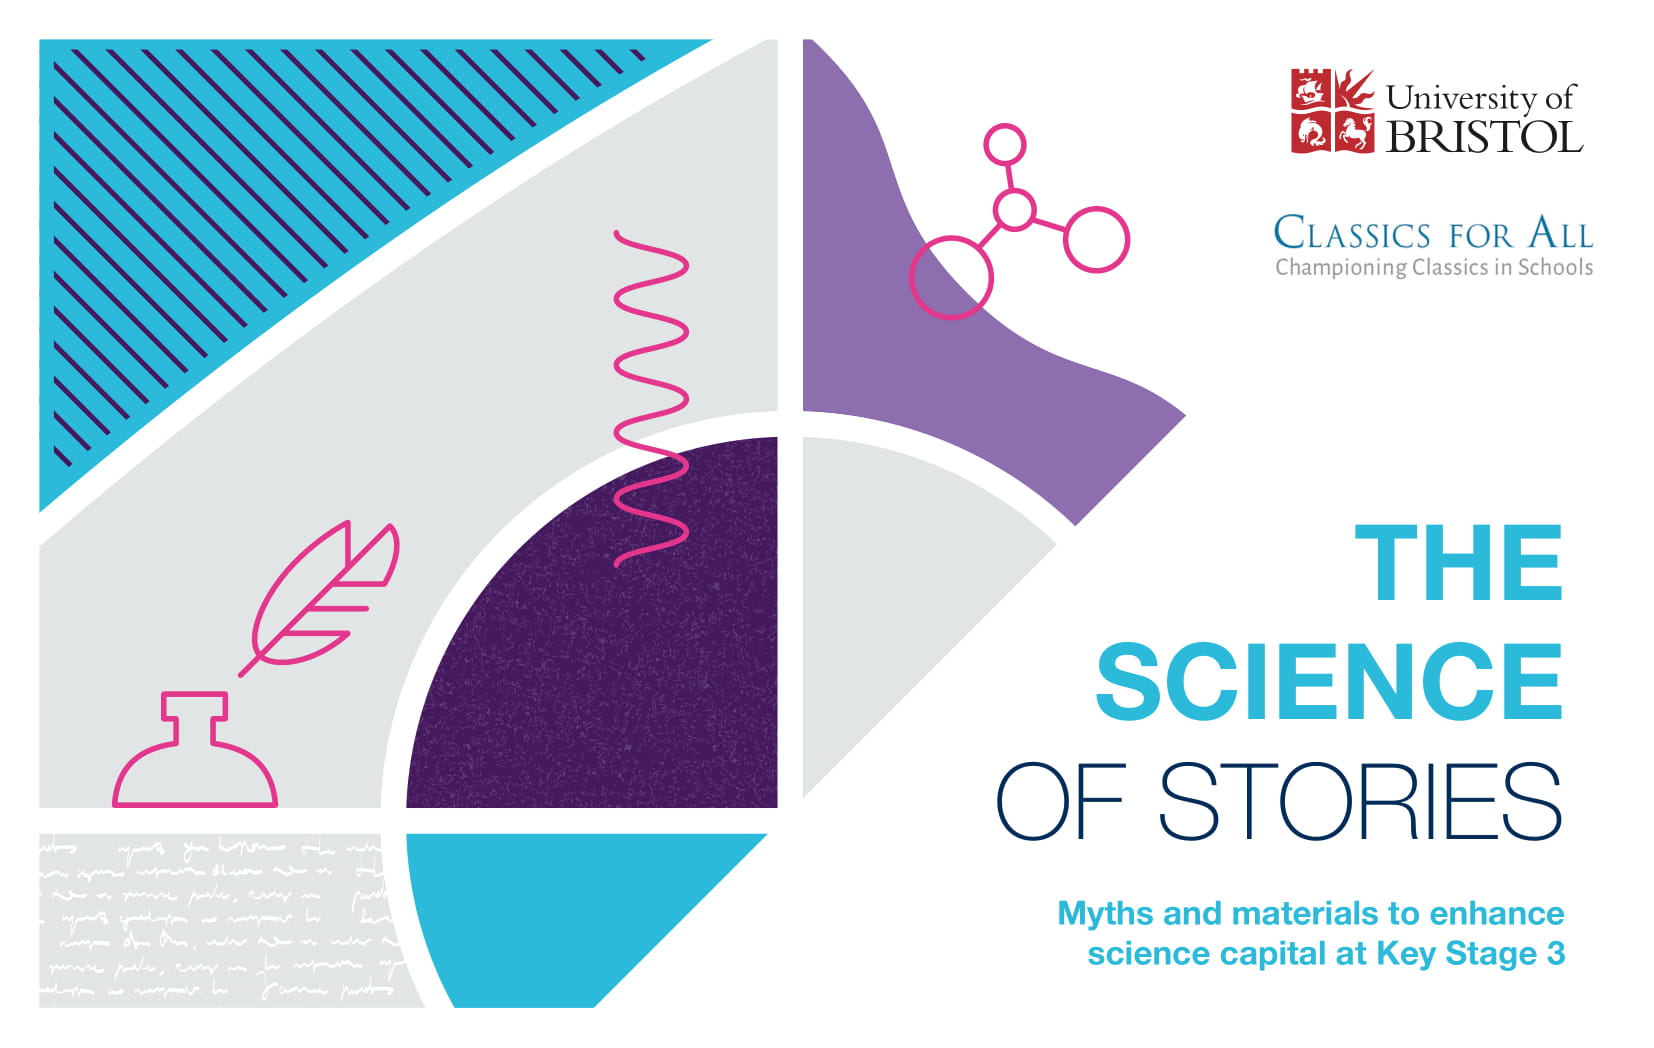 The Science of Stories image